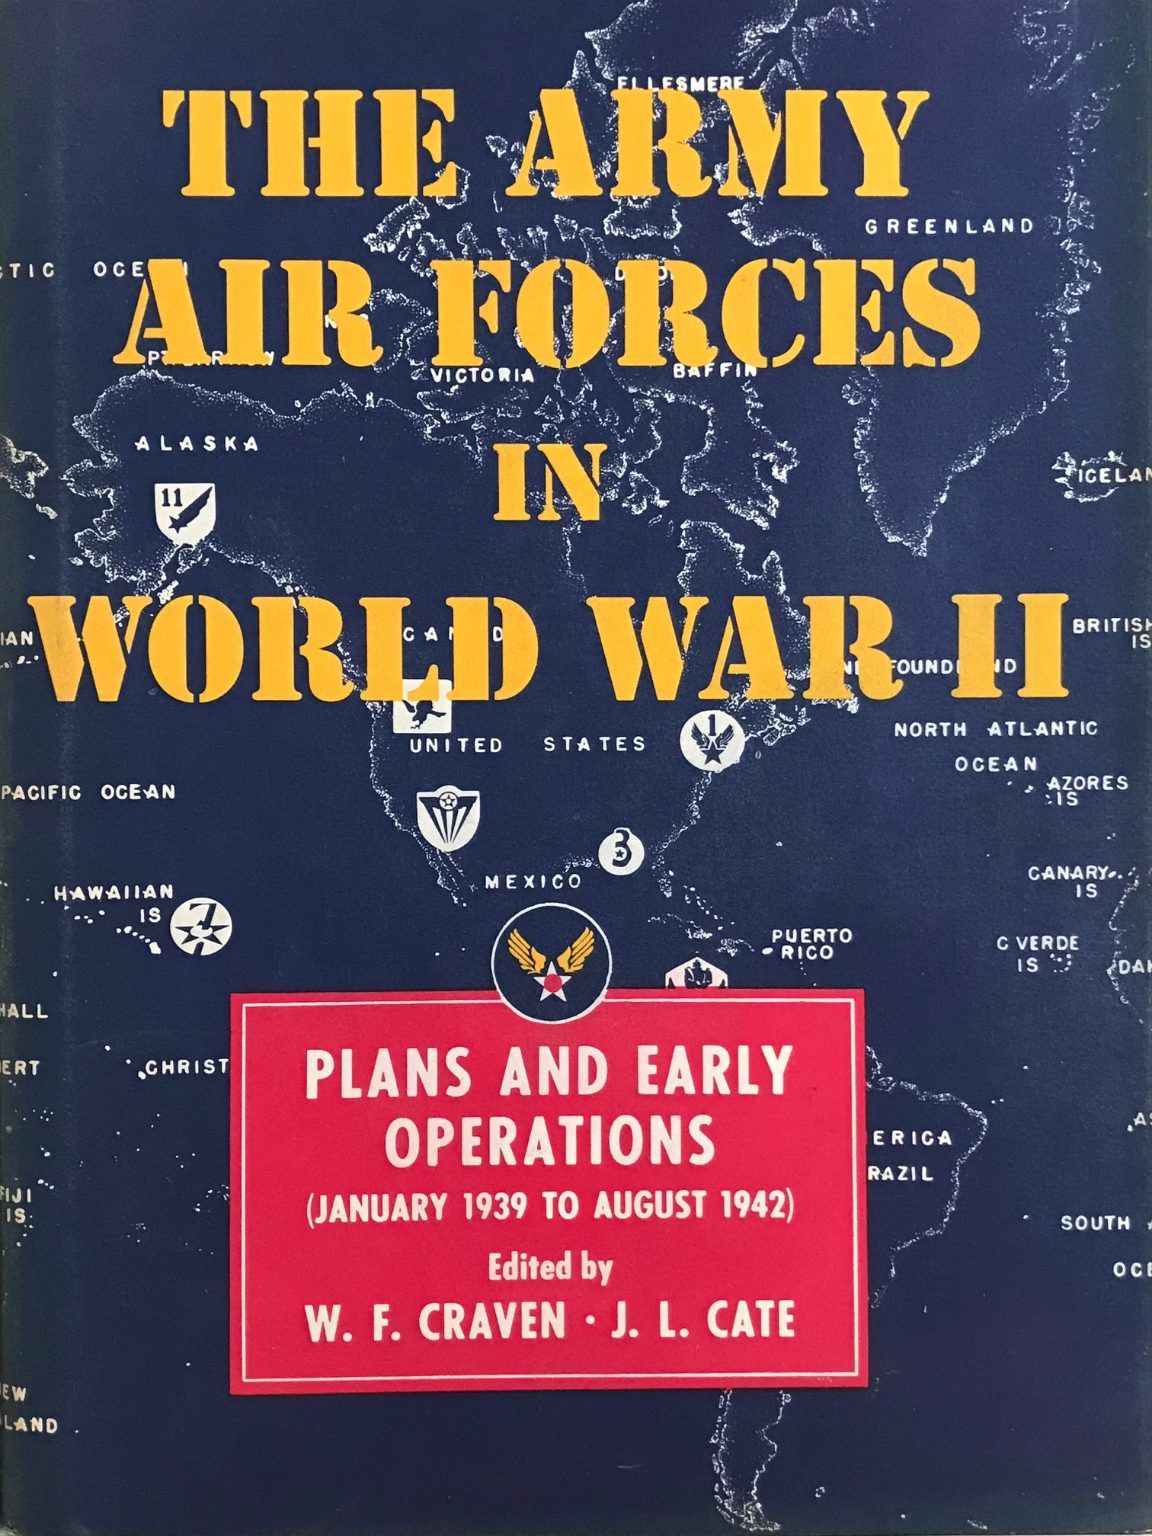 THE ARMY AIR FORCES IN WORLD WAR II: Volume One - Plans & Early Operations